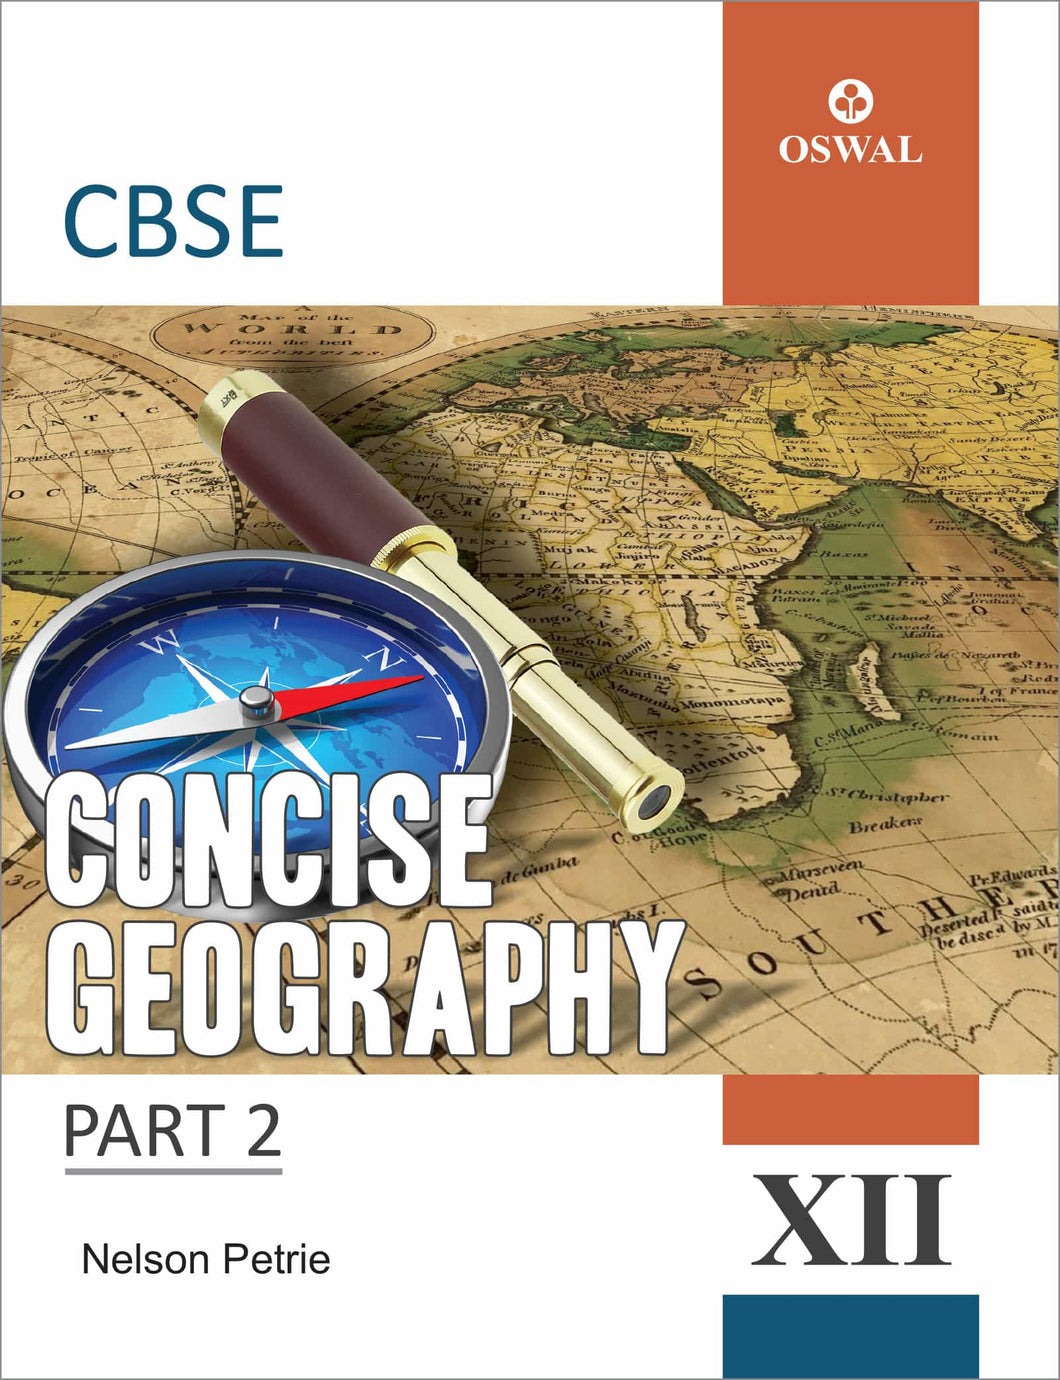 Oswal Concise Geography: Textbook for CBSE Class 12